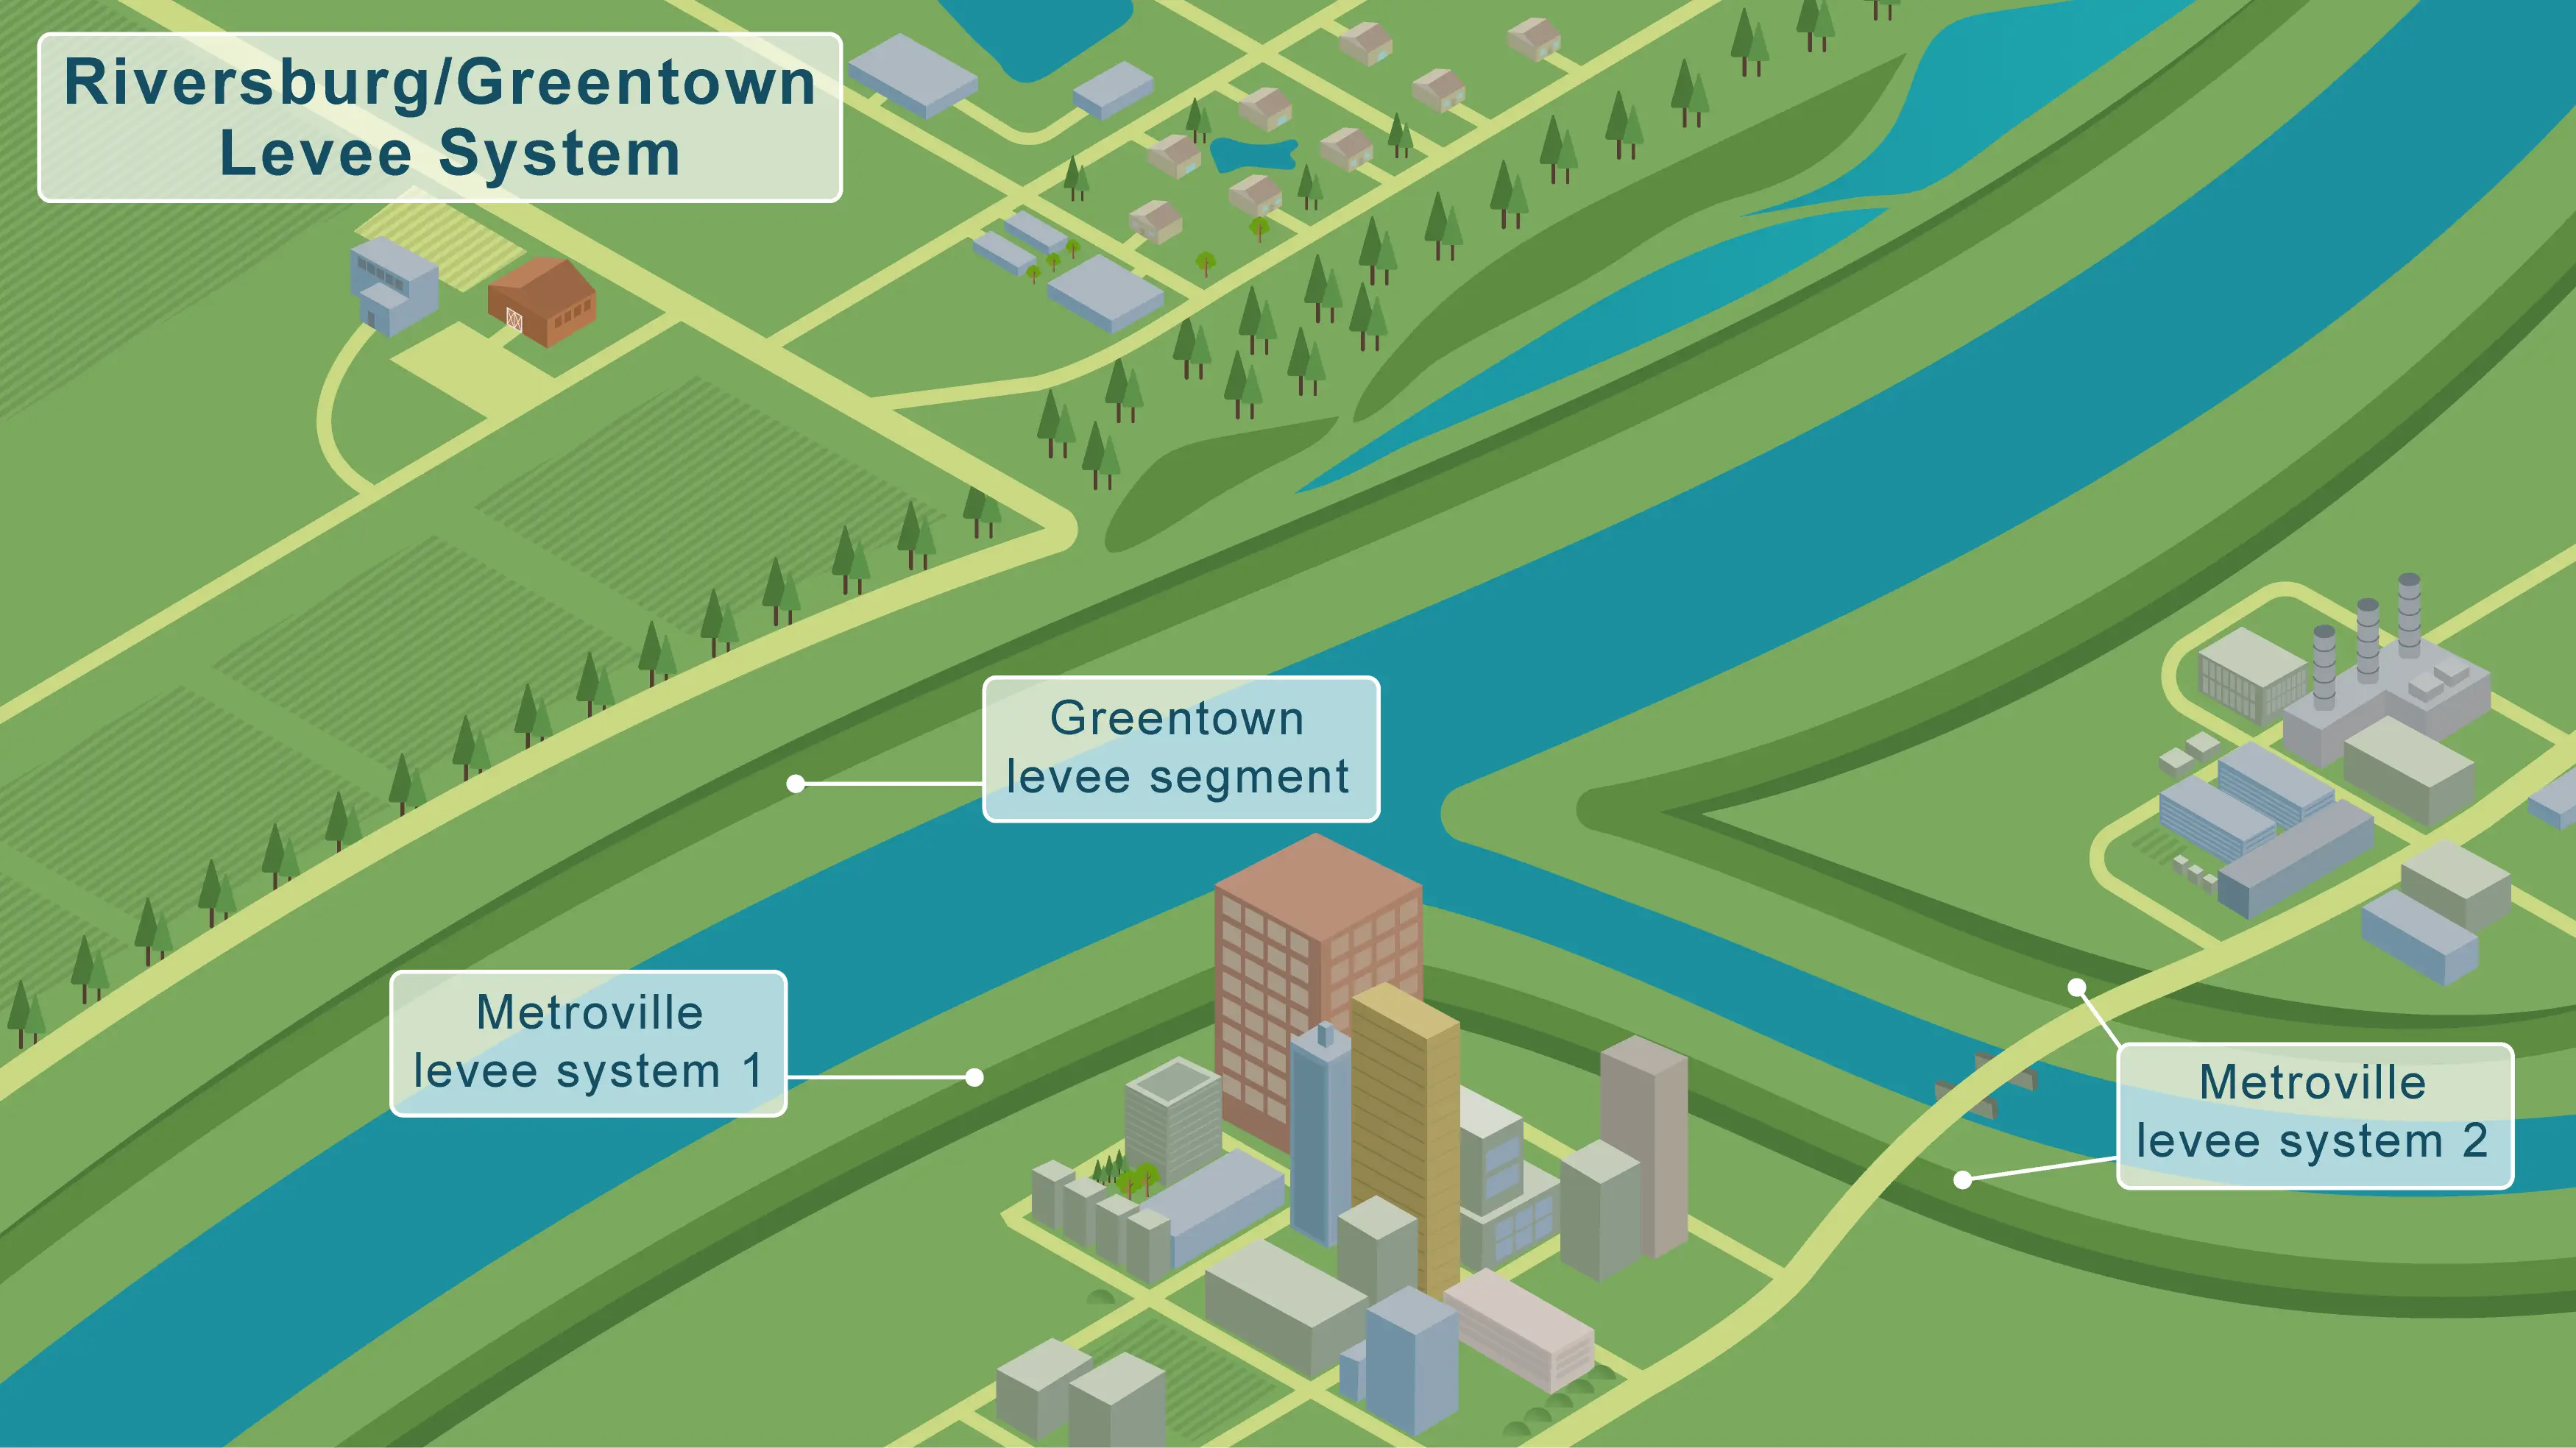 Levee infographic showing the different systems and segements of Riversburn/Greentown